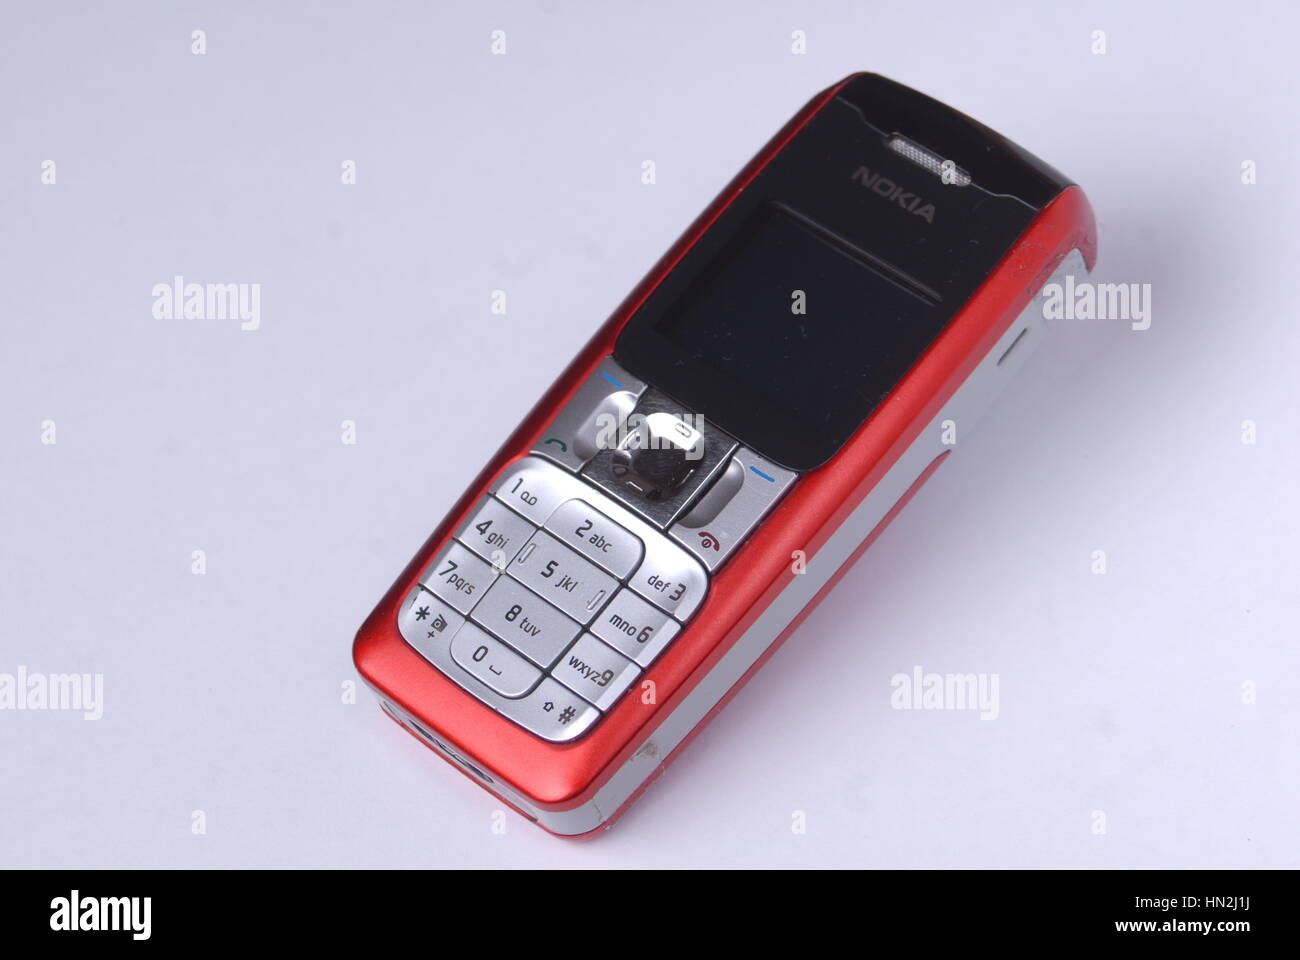 Red Nokia mobile phone on a white background Stock Photo